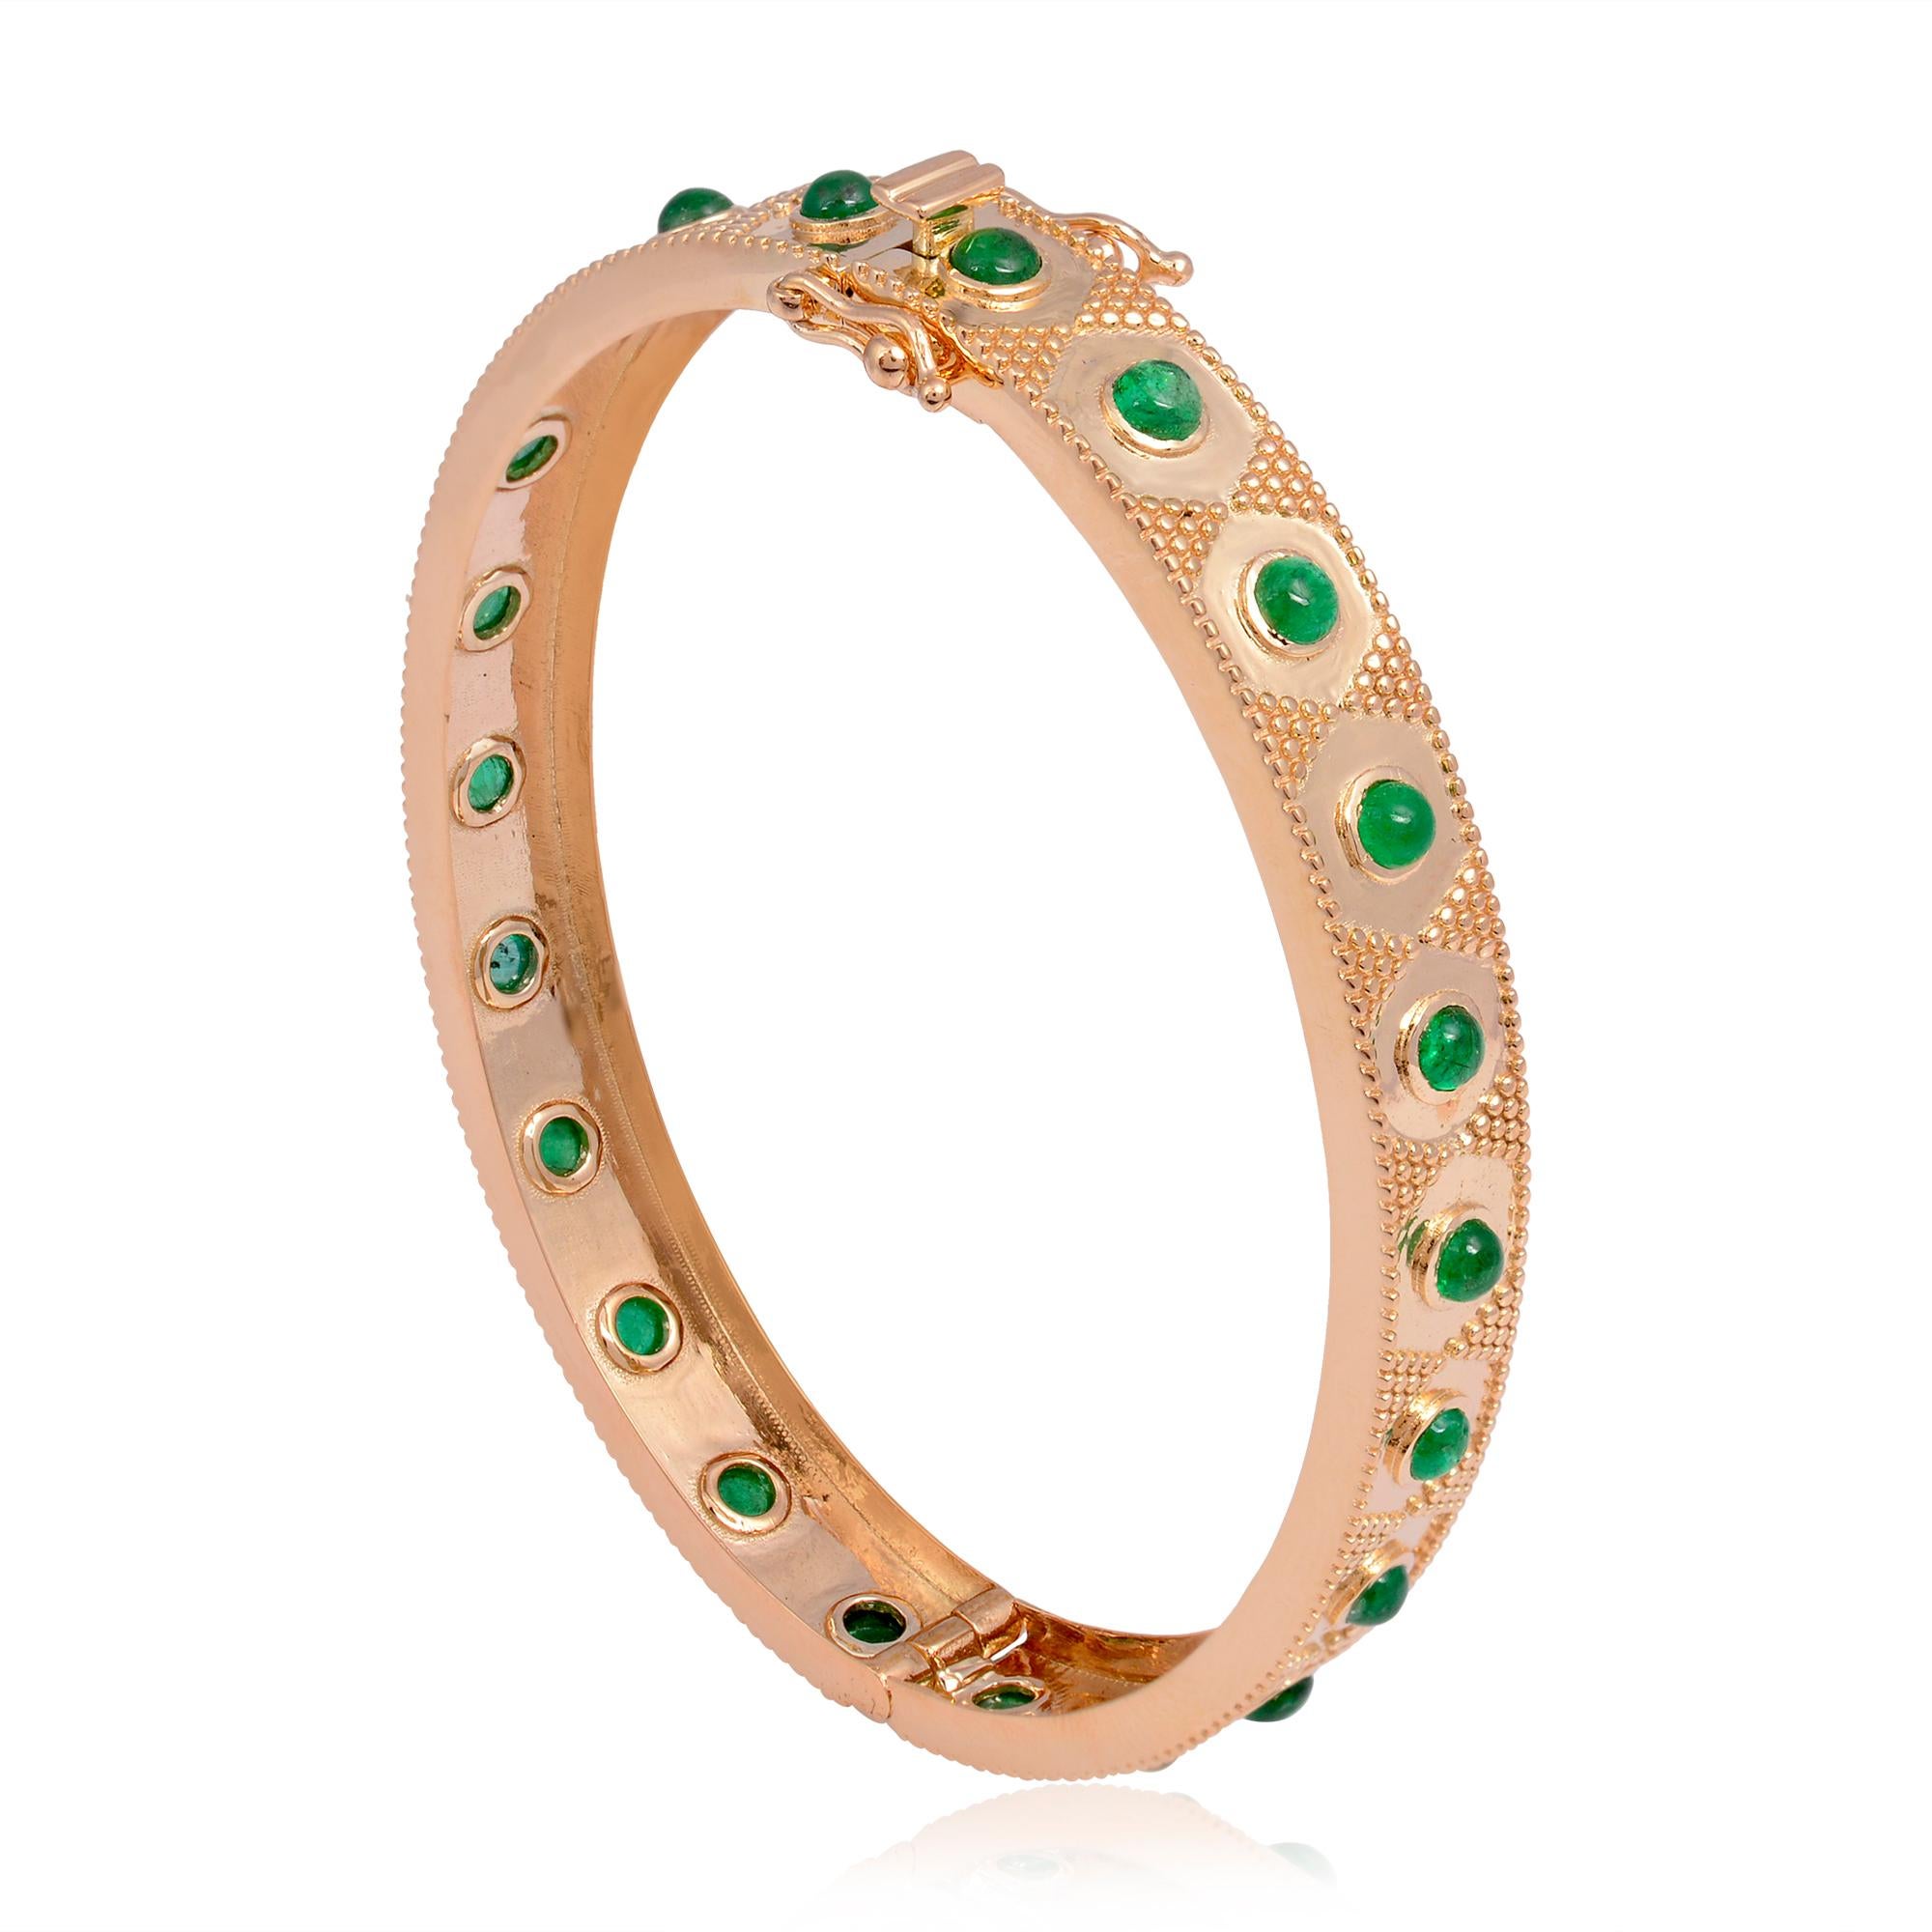 Item Code :- CN-25635
Gross Wt. :- 16.40 gm
18k Solid Rose Gold Wt. :- 15.78 gm
Zambian Emerald Wt. :- 3.10 Ct. 

✦ Sizing
.....................
We can adjust most items to fit your sizing preferences. Most items can be made to any size and length.